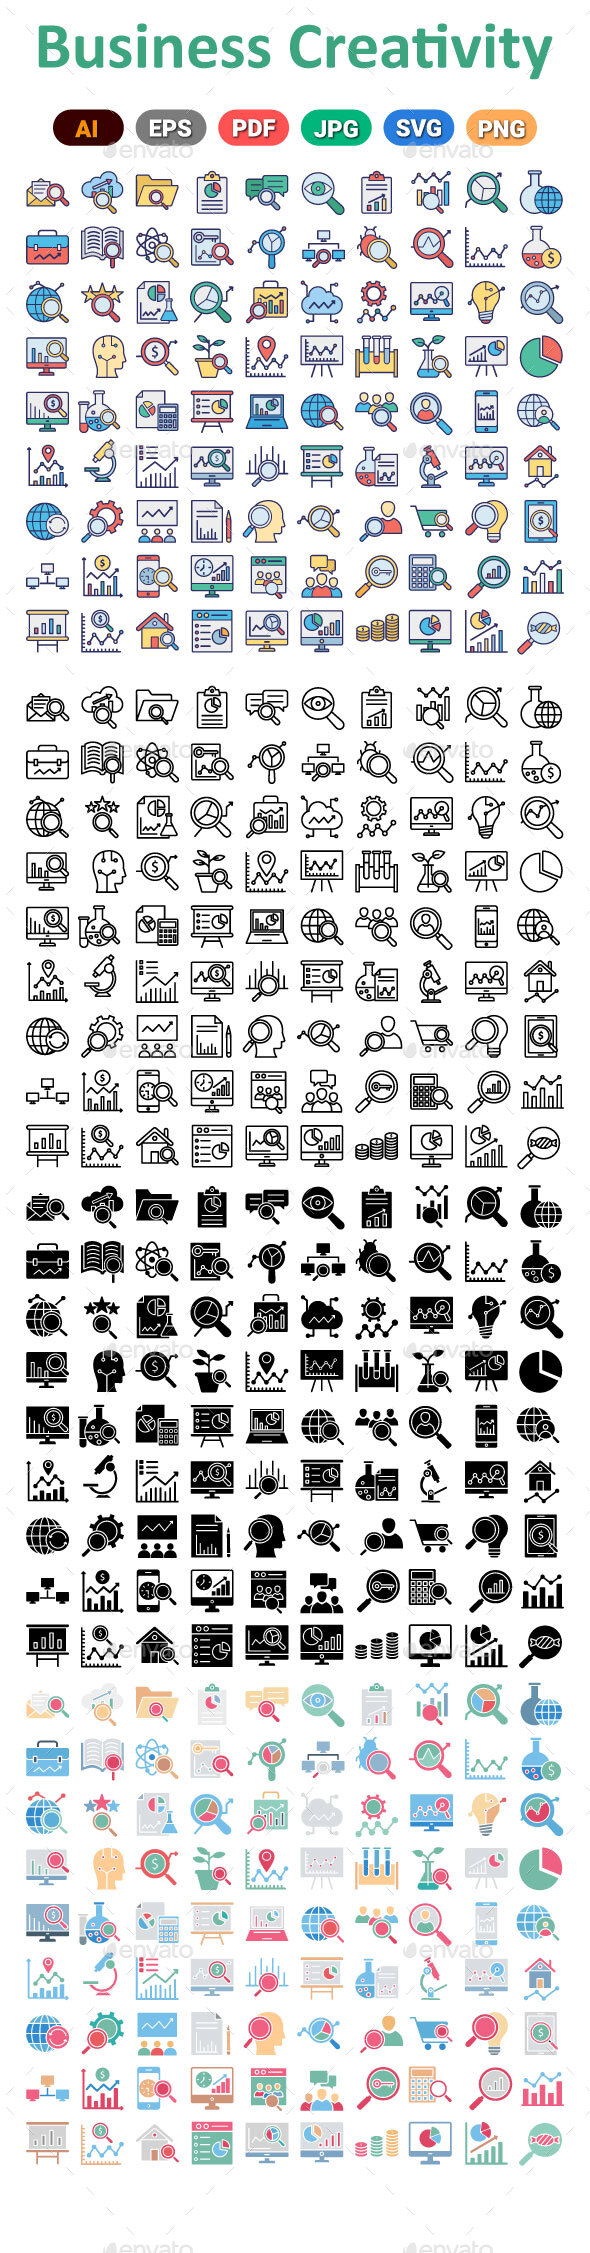 Explore And Analysis Vector icons set